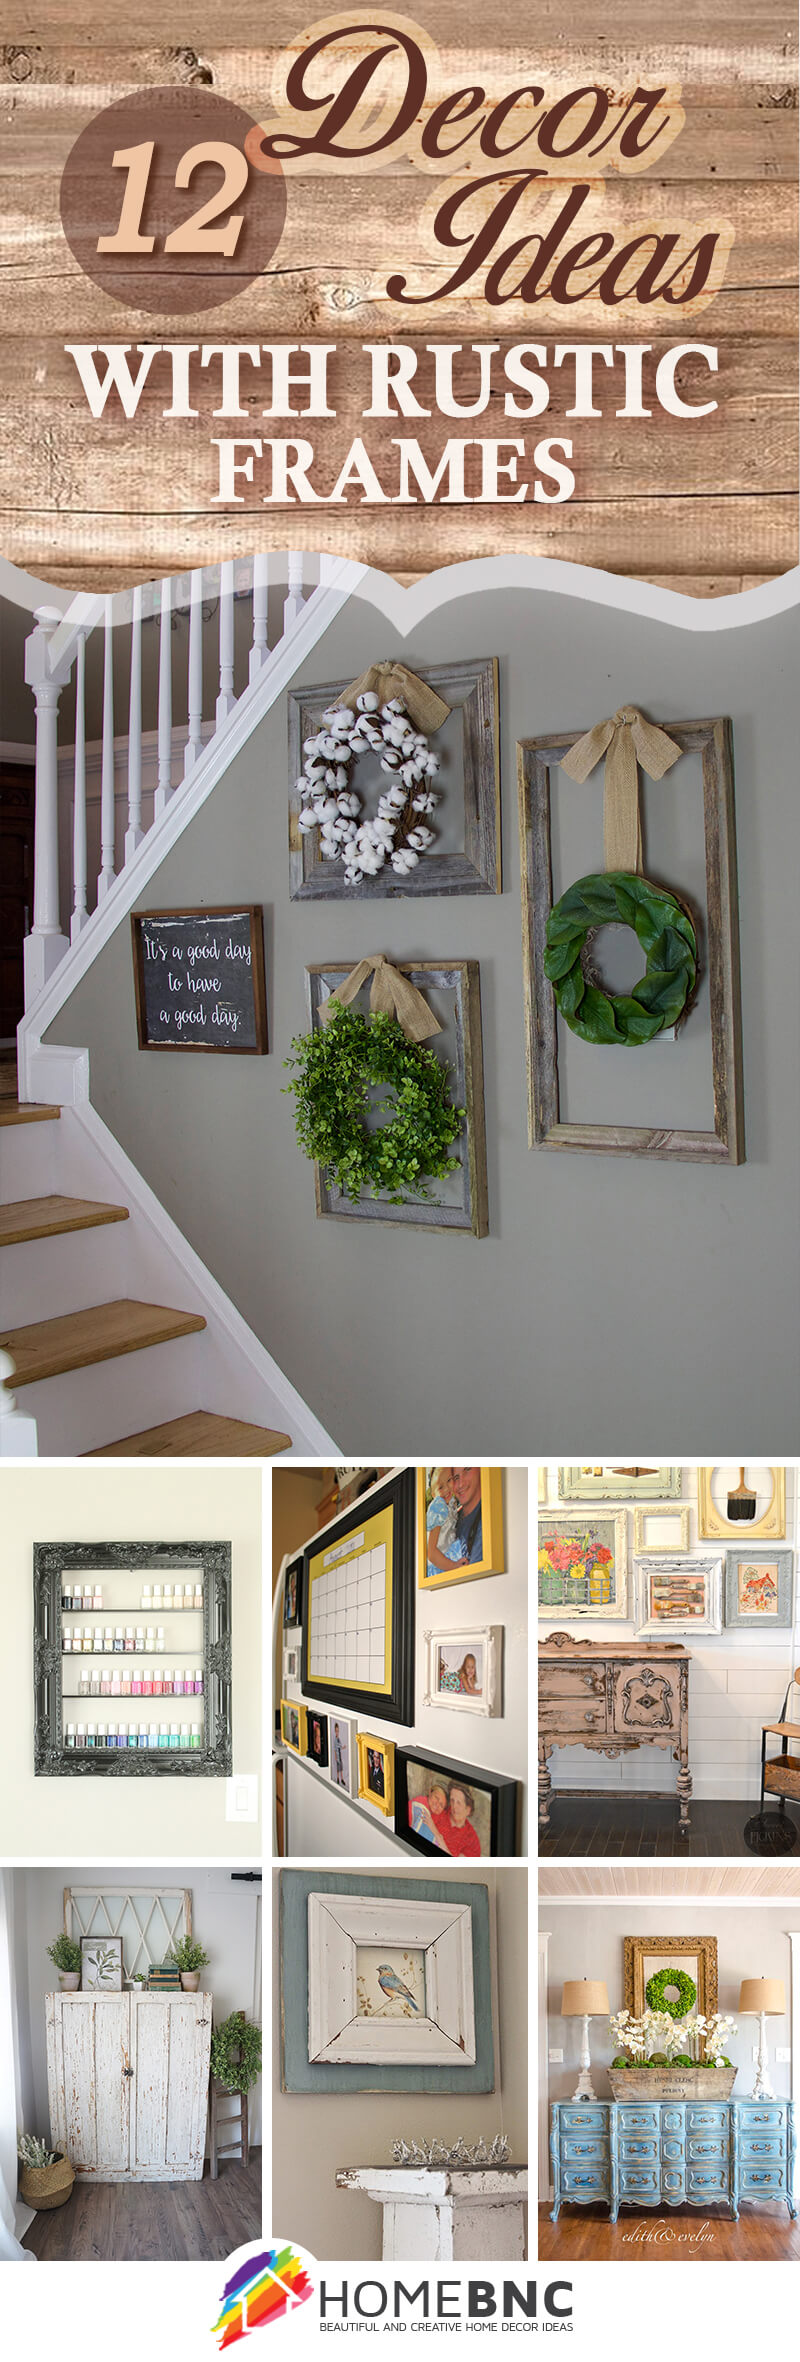 Decorating Ideas with Rustic Frames